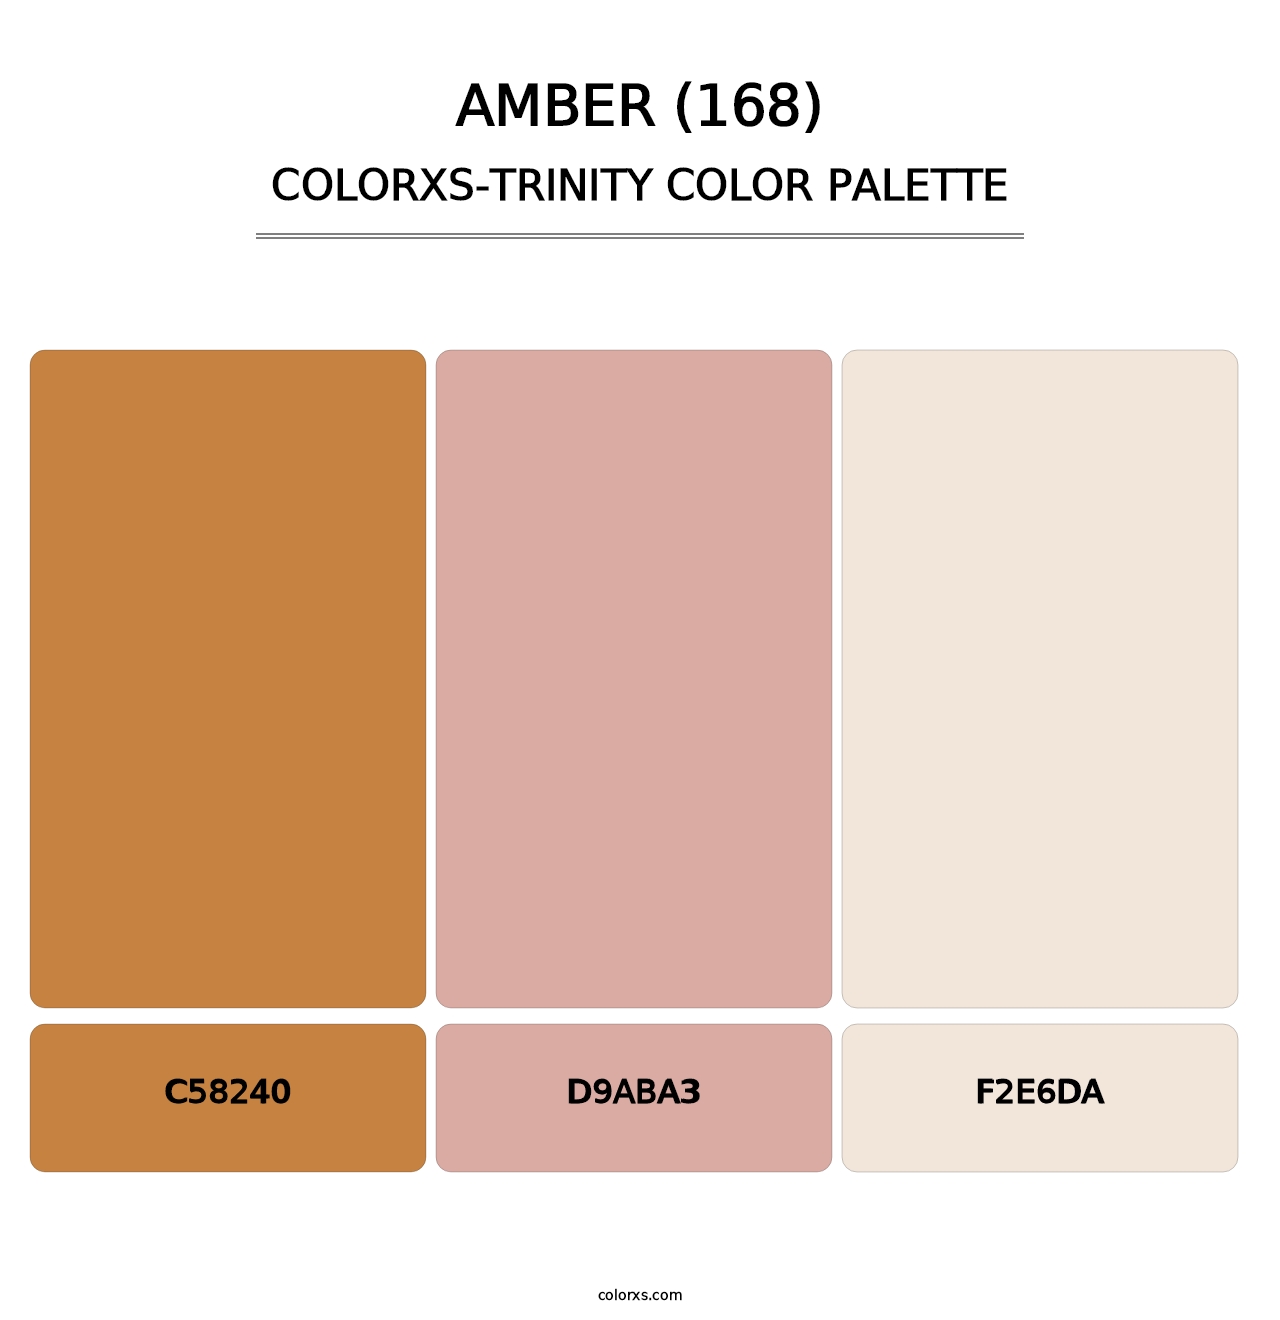 Amber (168) - Colorxs Trinity Palette